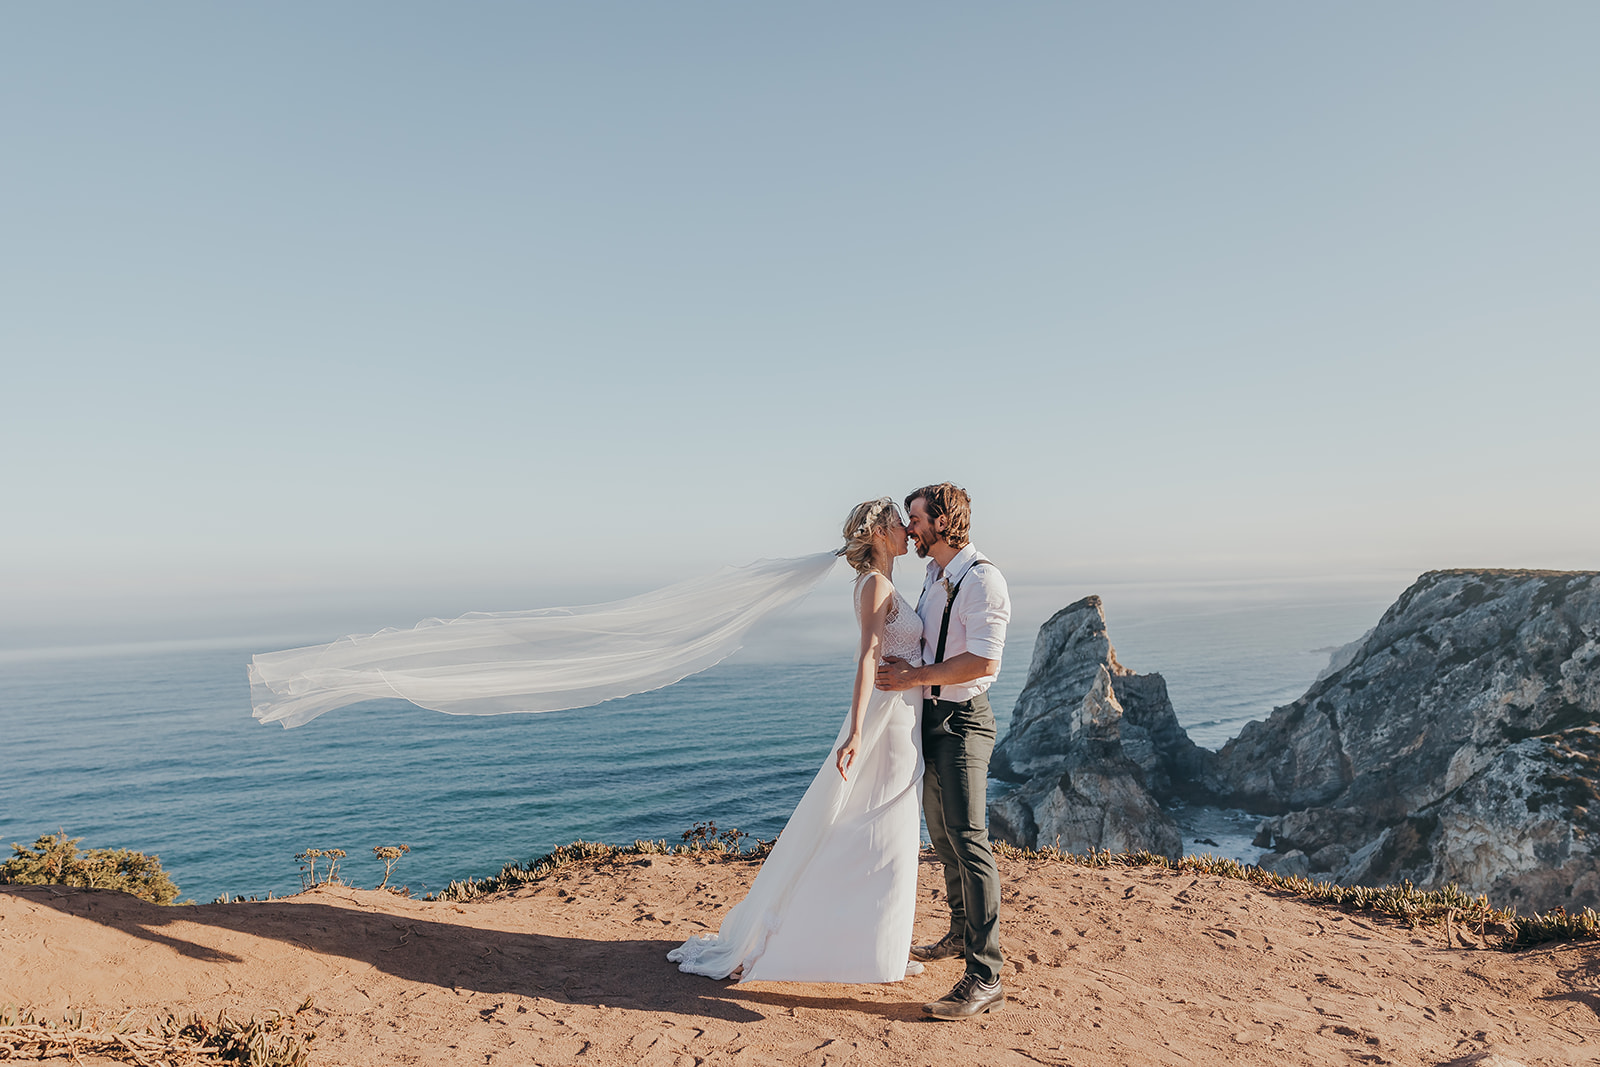 Portugal wedding planner for elopements